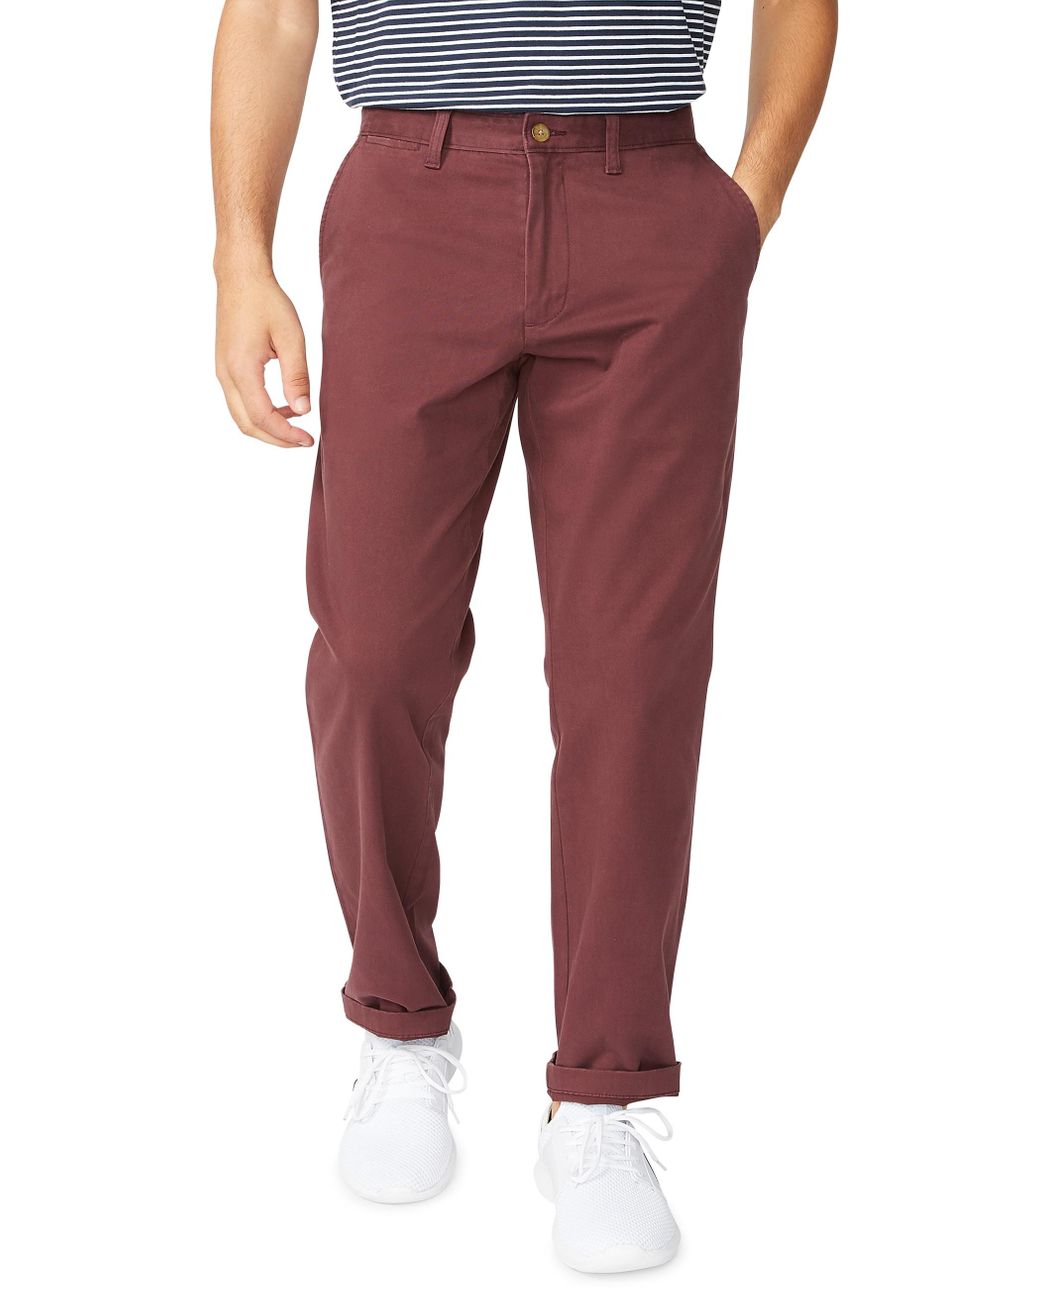 Nautica Big & Tall Deck Pants in Red for Men - Lyst